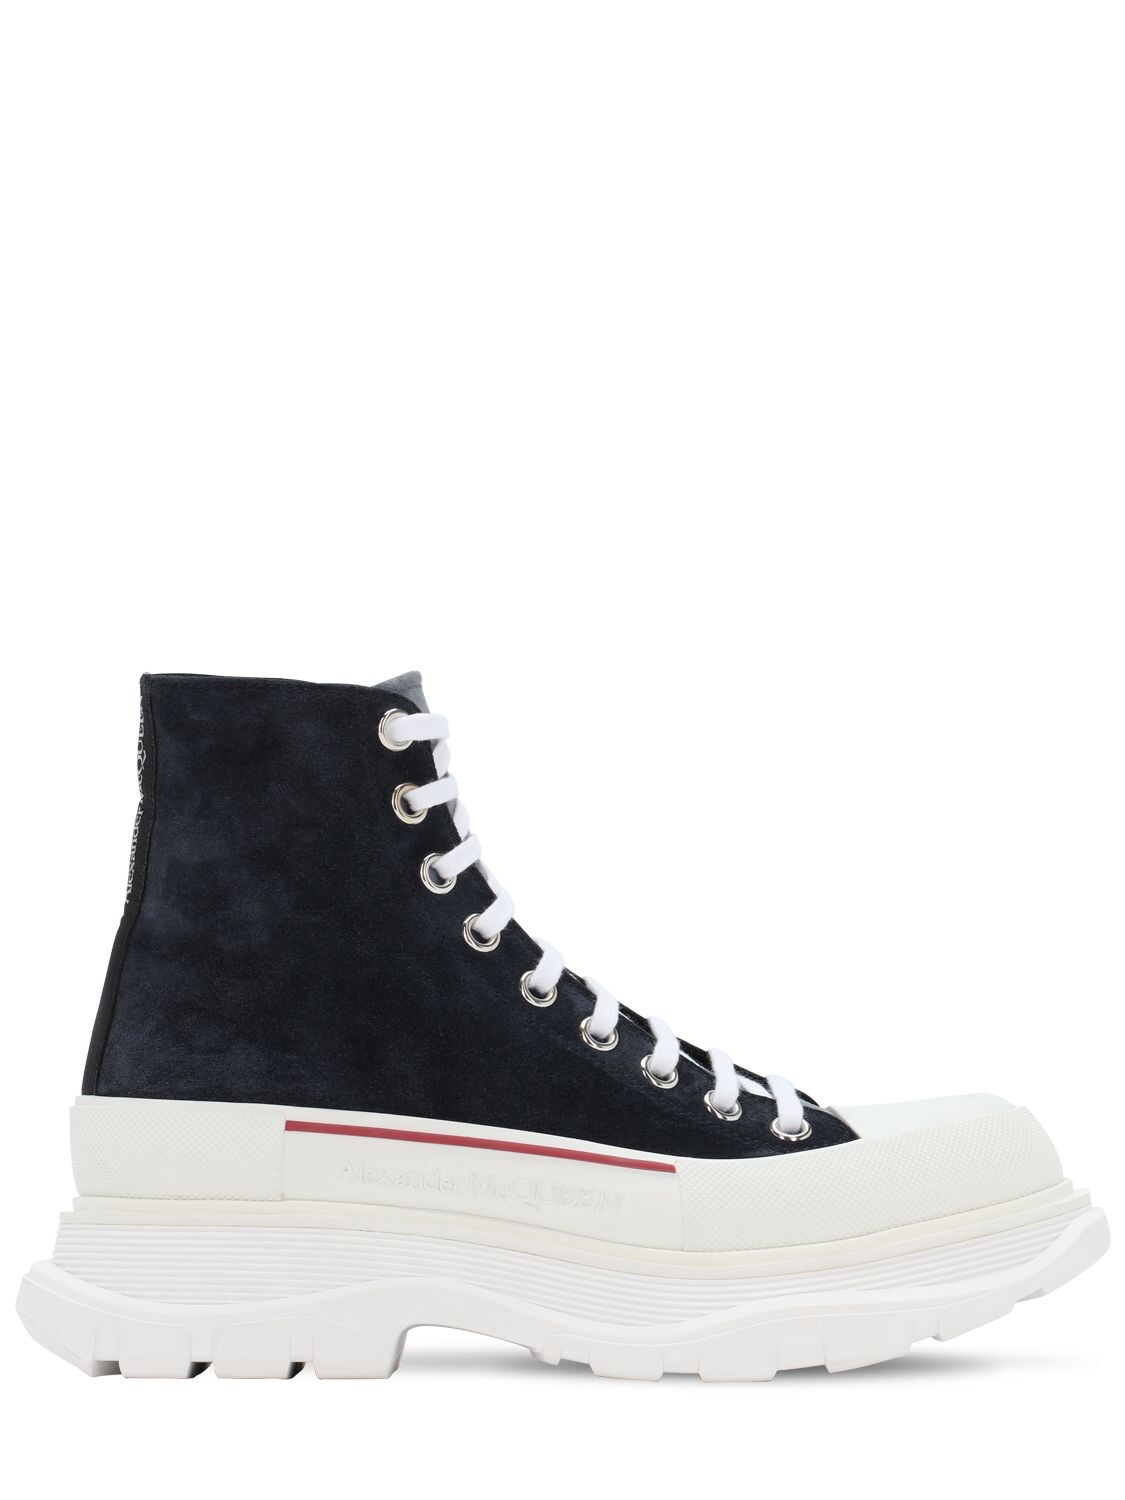 ALEXANDER MCQUEEN HIGH TOP LEATHER LACE-UP trainers,72IA9U011-NDAXOA2